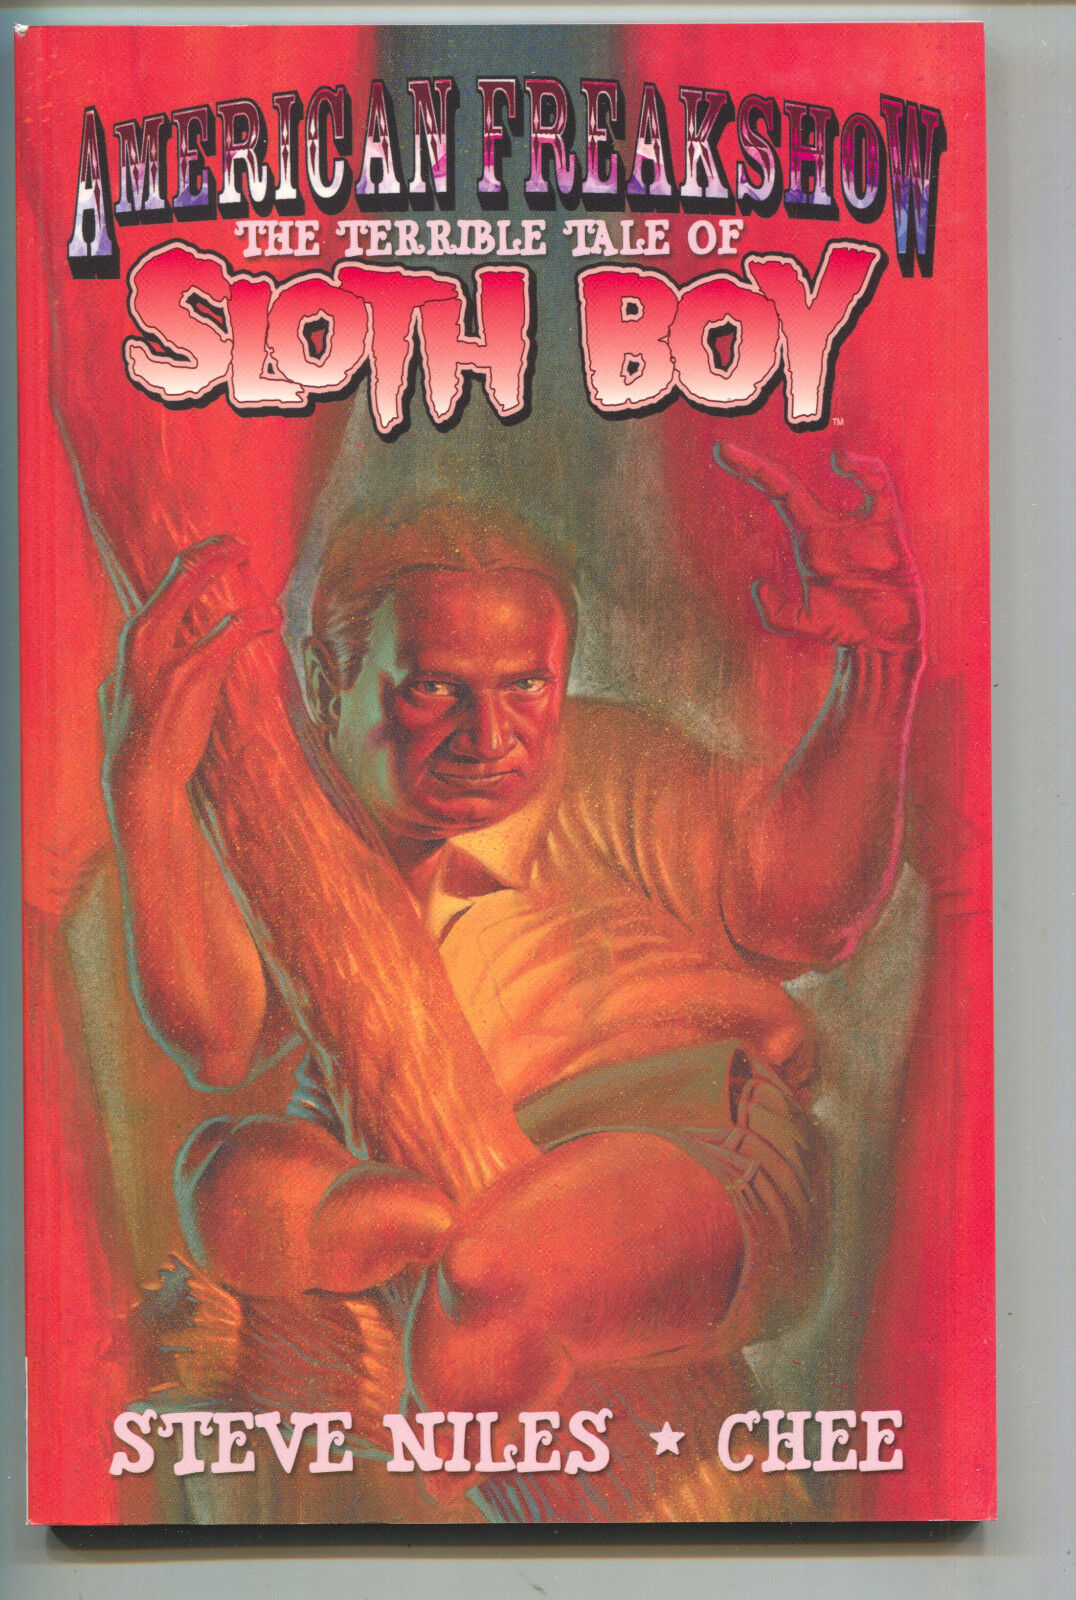 American Freakshow Terrible Tale Of Sloth Boy 1 GN TPB IDW 2008 NM+ 9.6